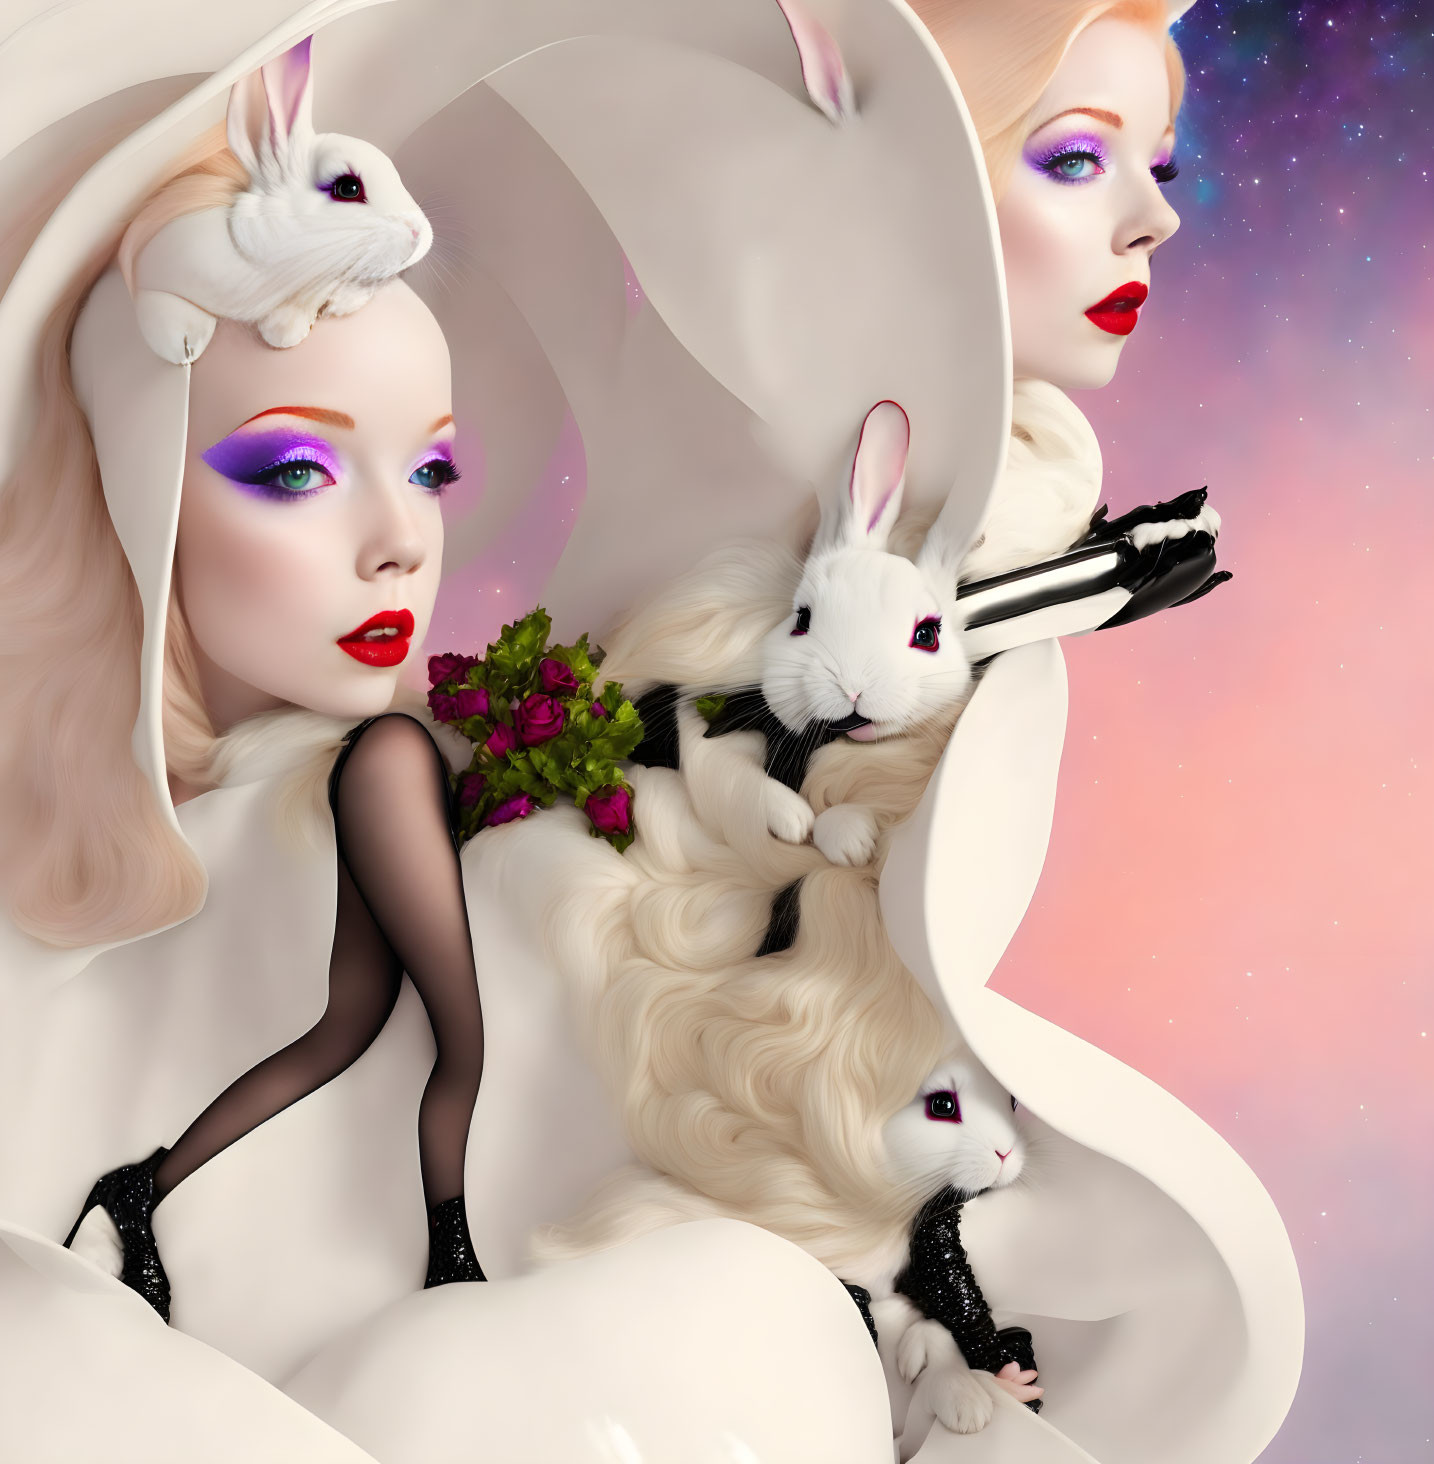 Surreal image of woman multiplied in spiraling form with cosmic backdrop and white rabbits.